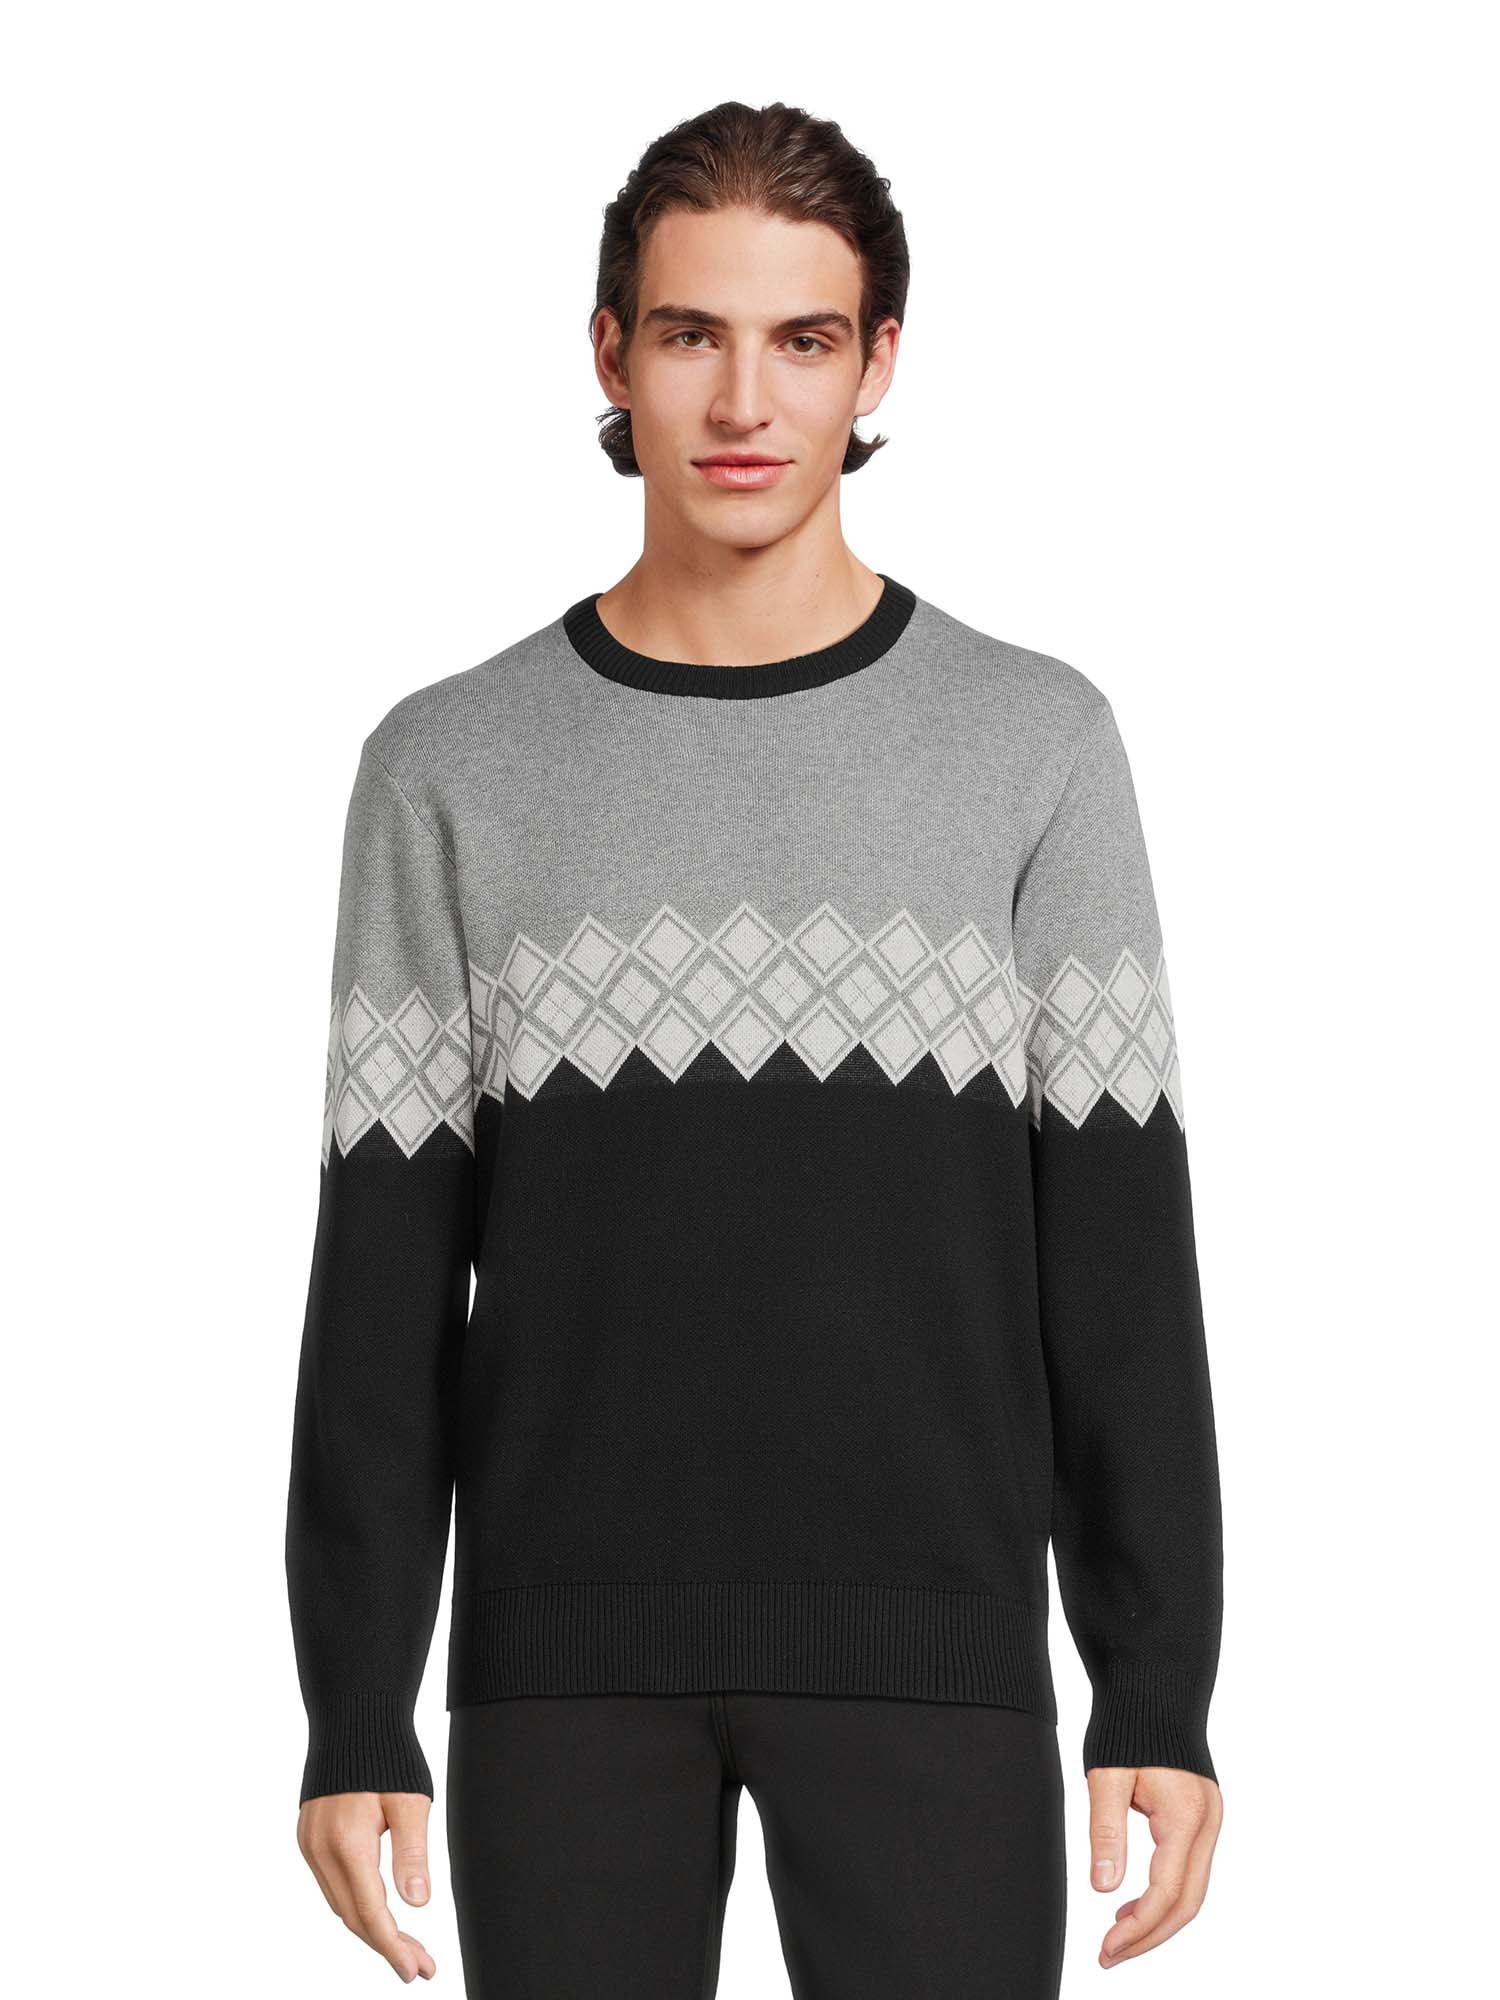 George Men's Fair Isle Sweater with Long Sleeves, Sizes S-3XL - Walmart.com